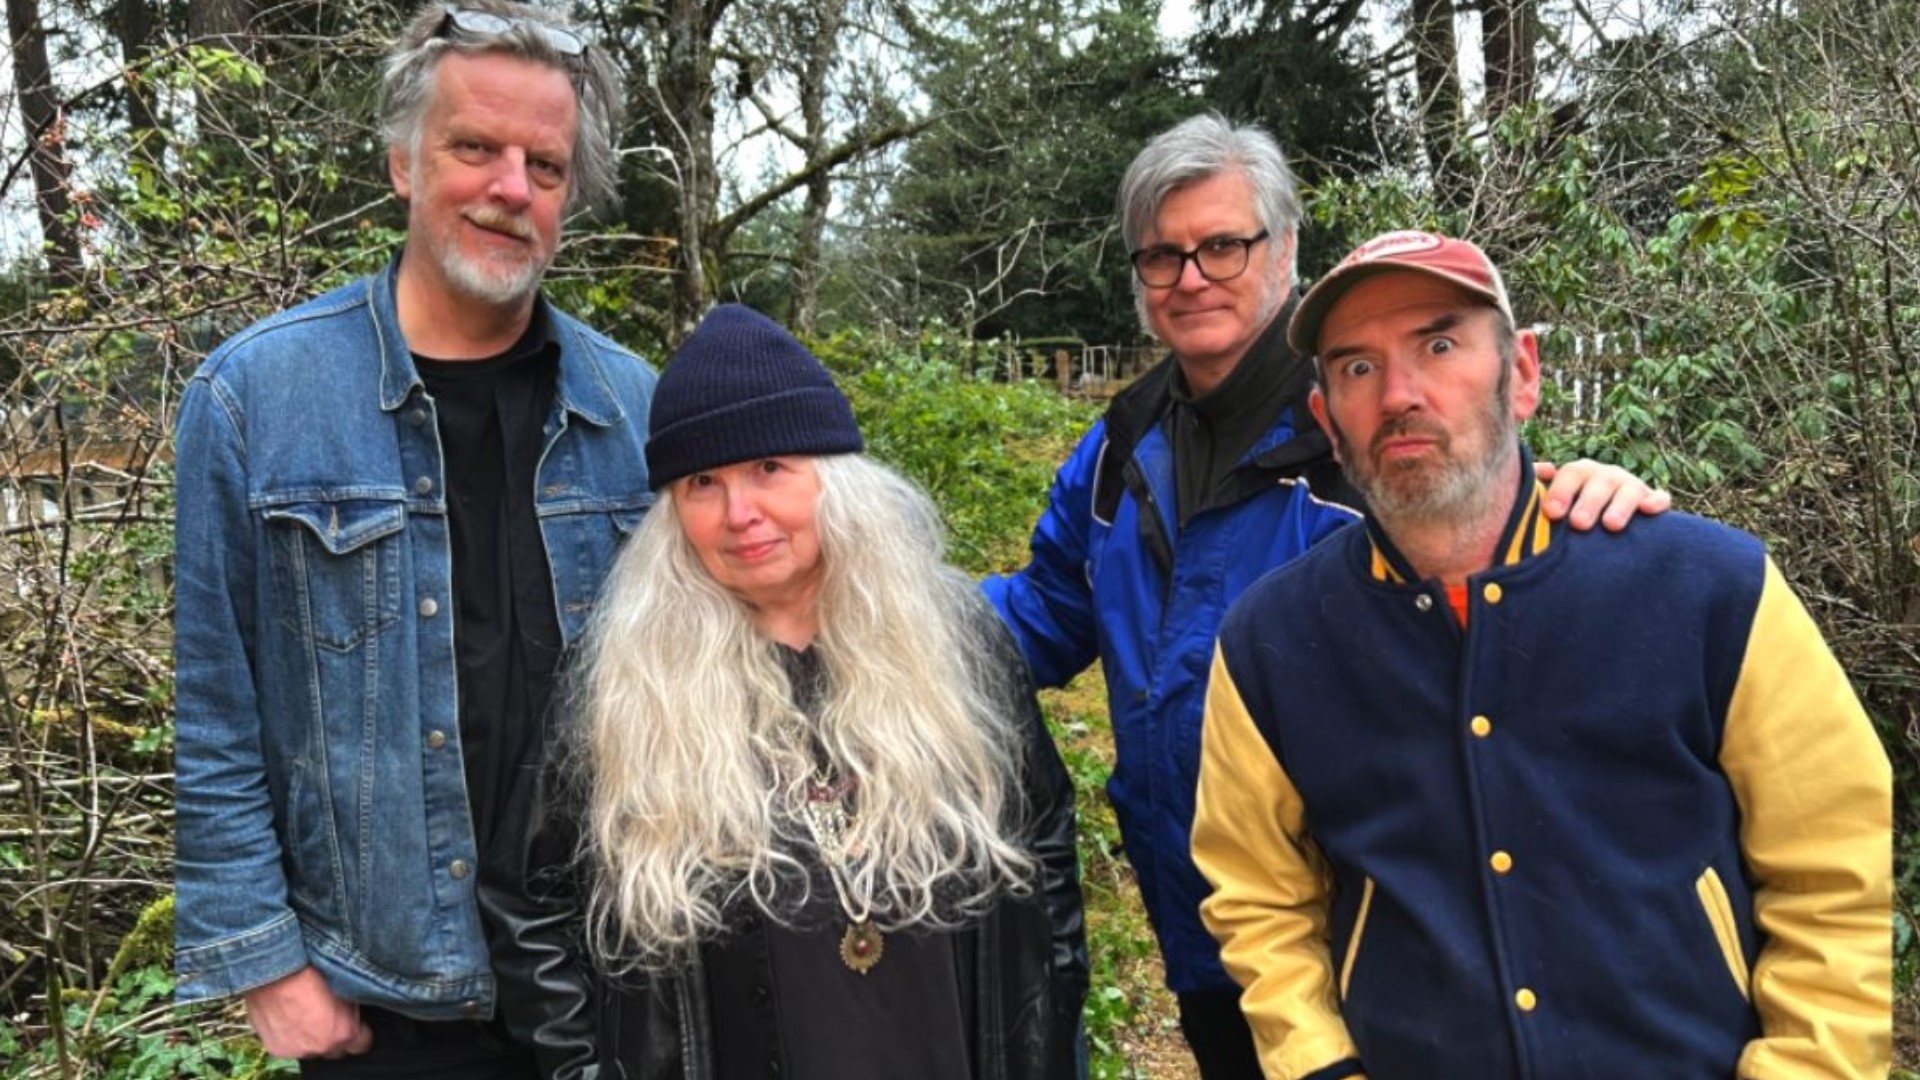 Girl Trouble celebrate '40 years of Eluding Fame' at the Spanish Ballroom March 8. #k5evening